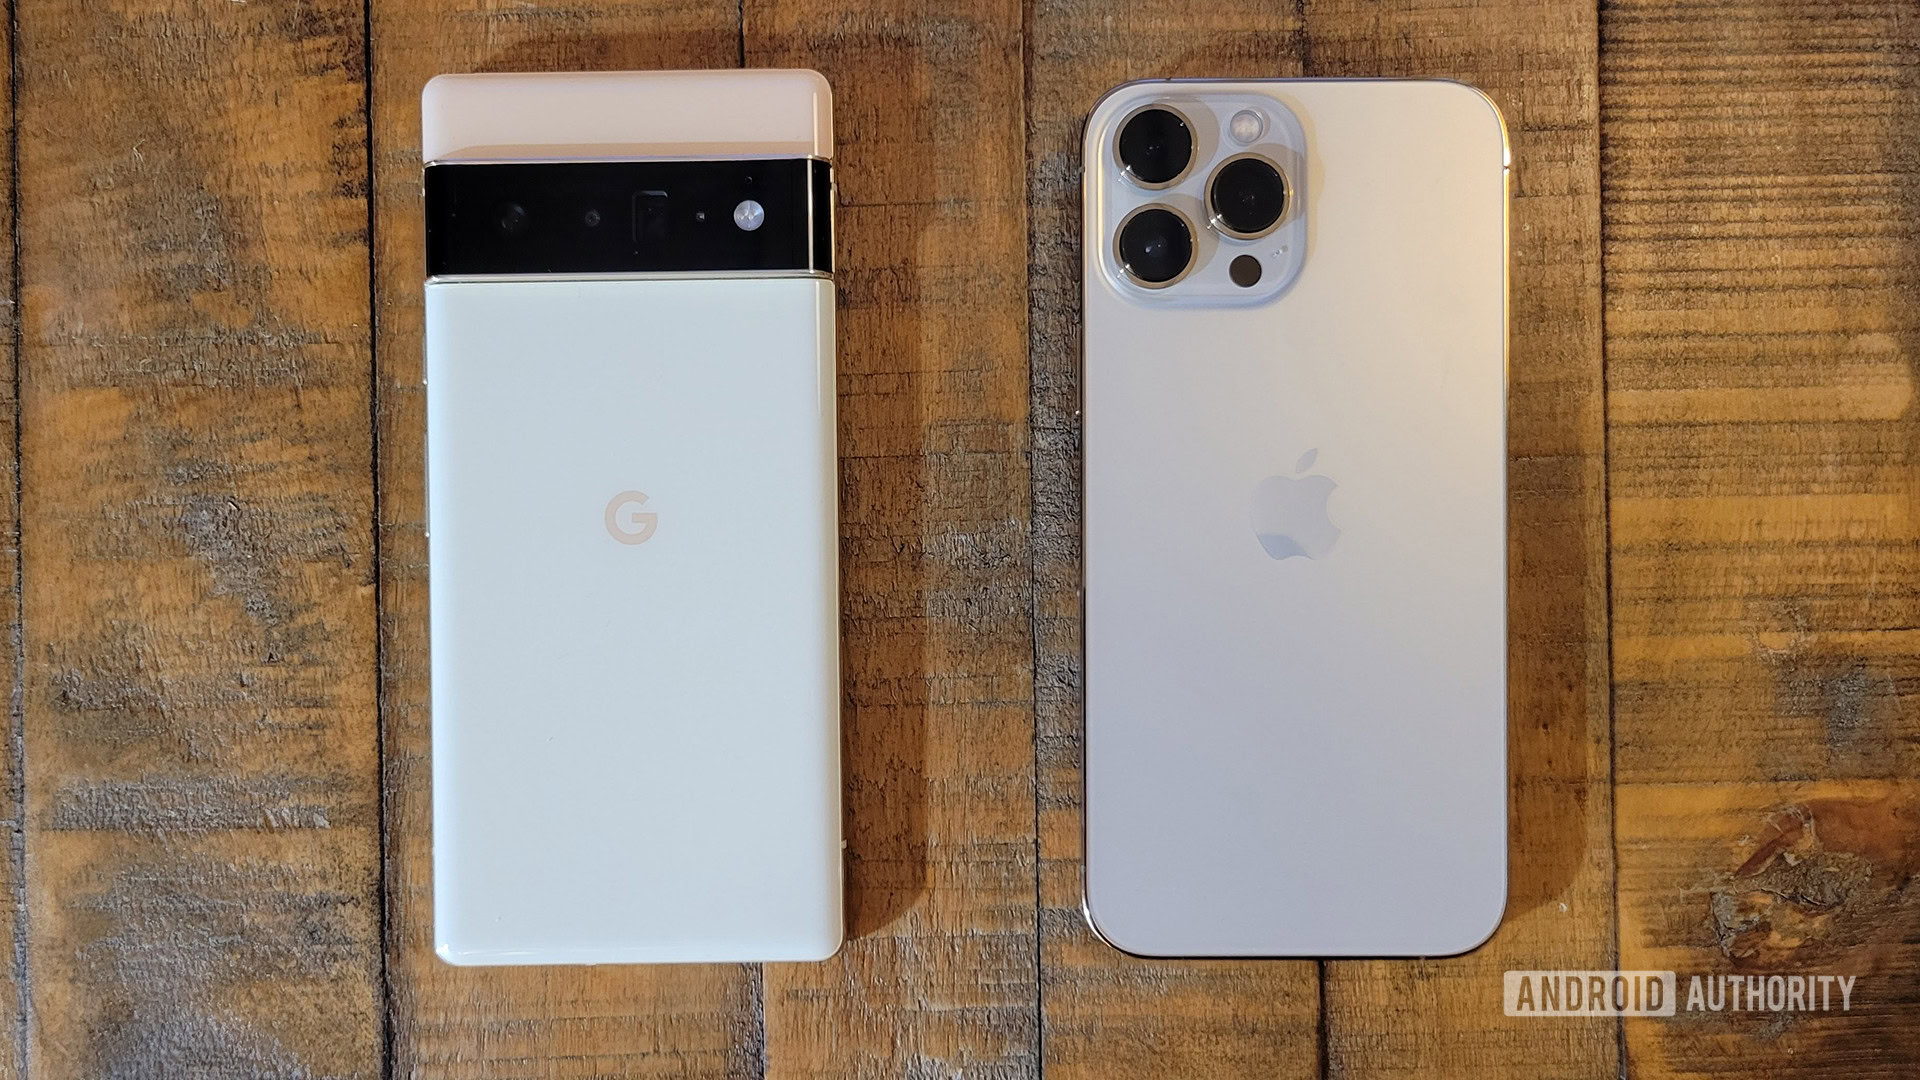 Google Pixel 6 vs Apple iPhone 13: Which should you buy?